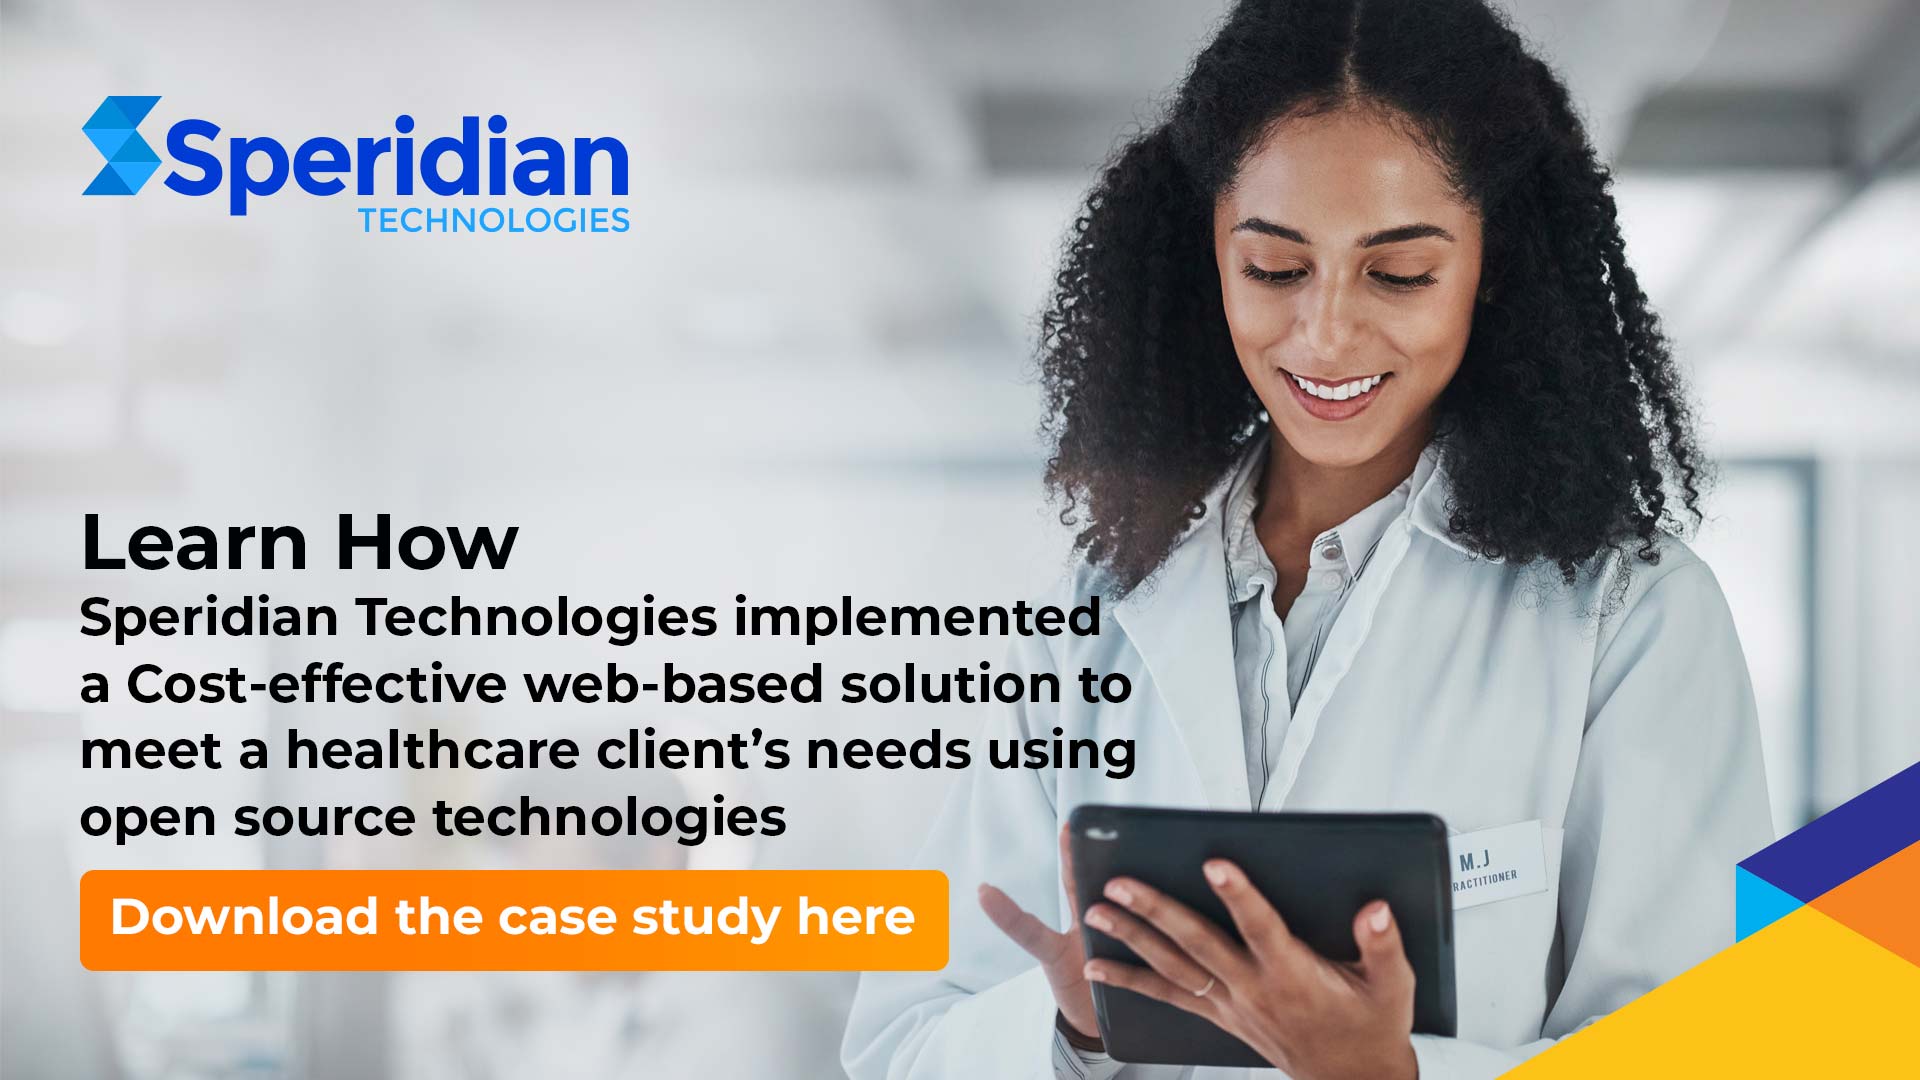 Speridian Technologies implemented a Cost-effective web-based solution to meet a healthcare client’s needs using open source technologies